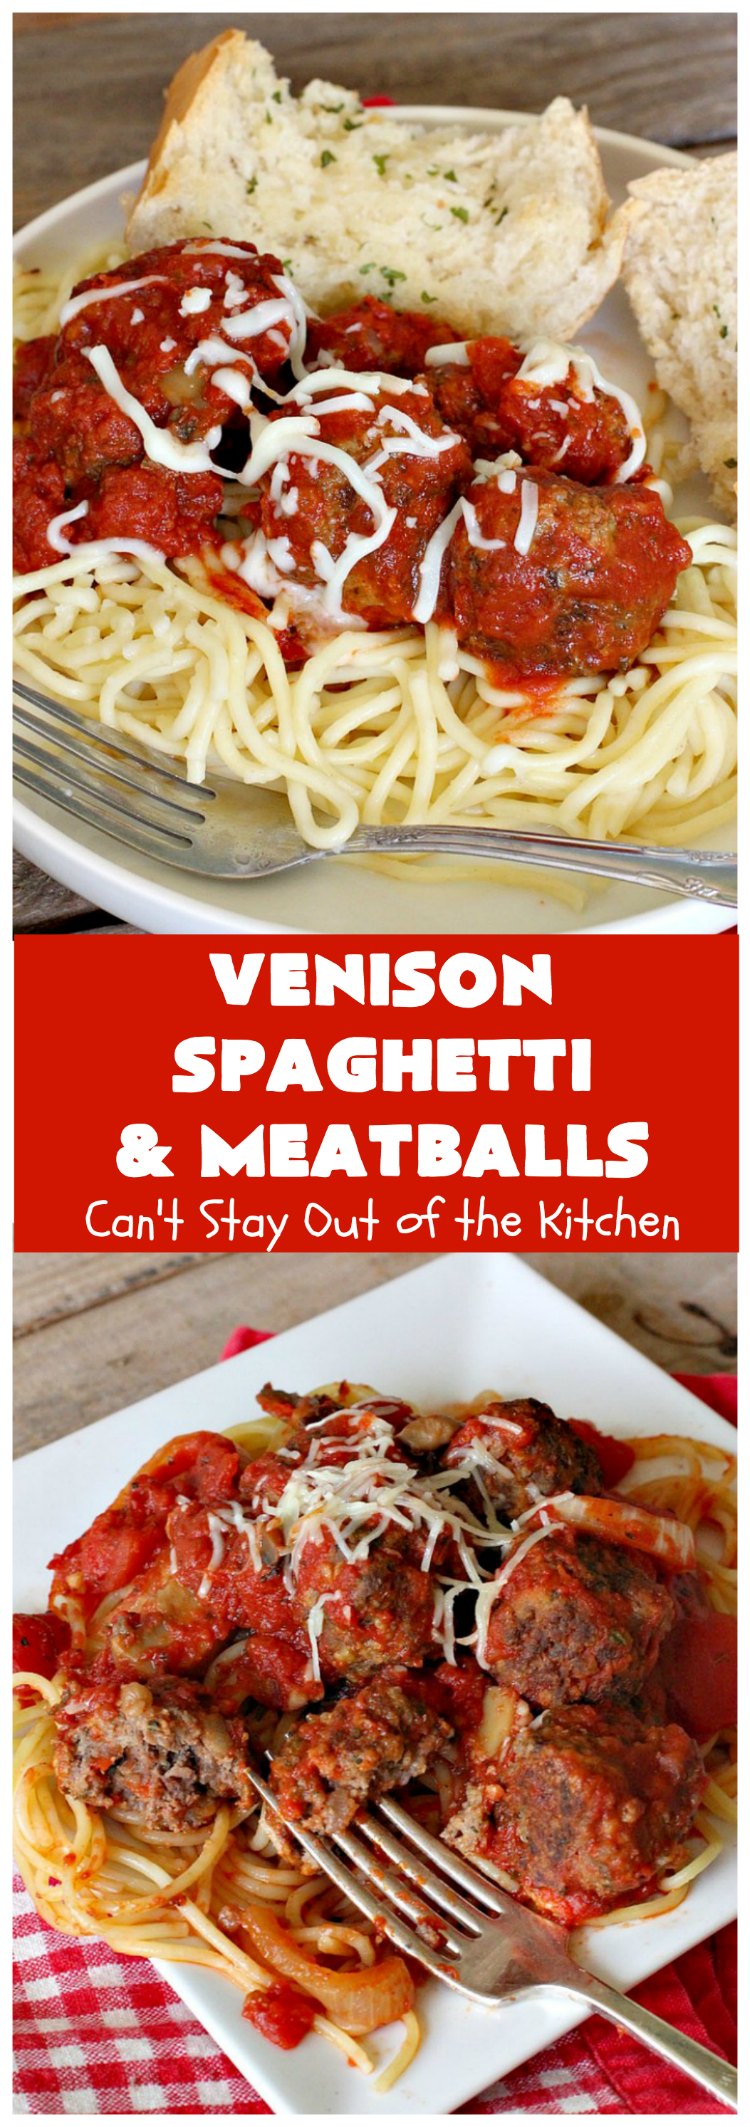 Venison Spaghetti and Meatballs | Can't Stay Out of the Kitchen | this #SpaghettiAndMeatballs version can't be beat! It takes the best of #spaghetti & #meatballs but uses #venison instead. No one will ever believe you're using #DeerMeat instead of #beef! This #LowCalorie entree will knock your socks off! #Italian #pasta #VenisonSpaghettiAndMeatballs